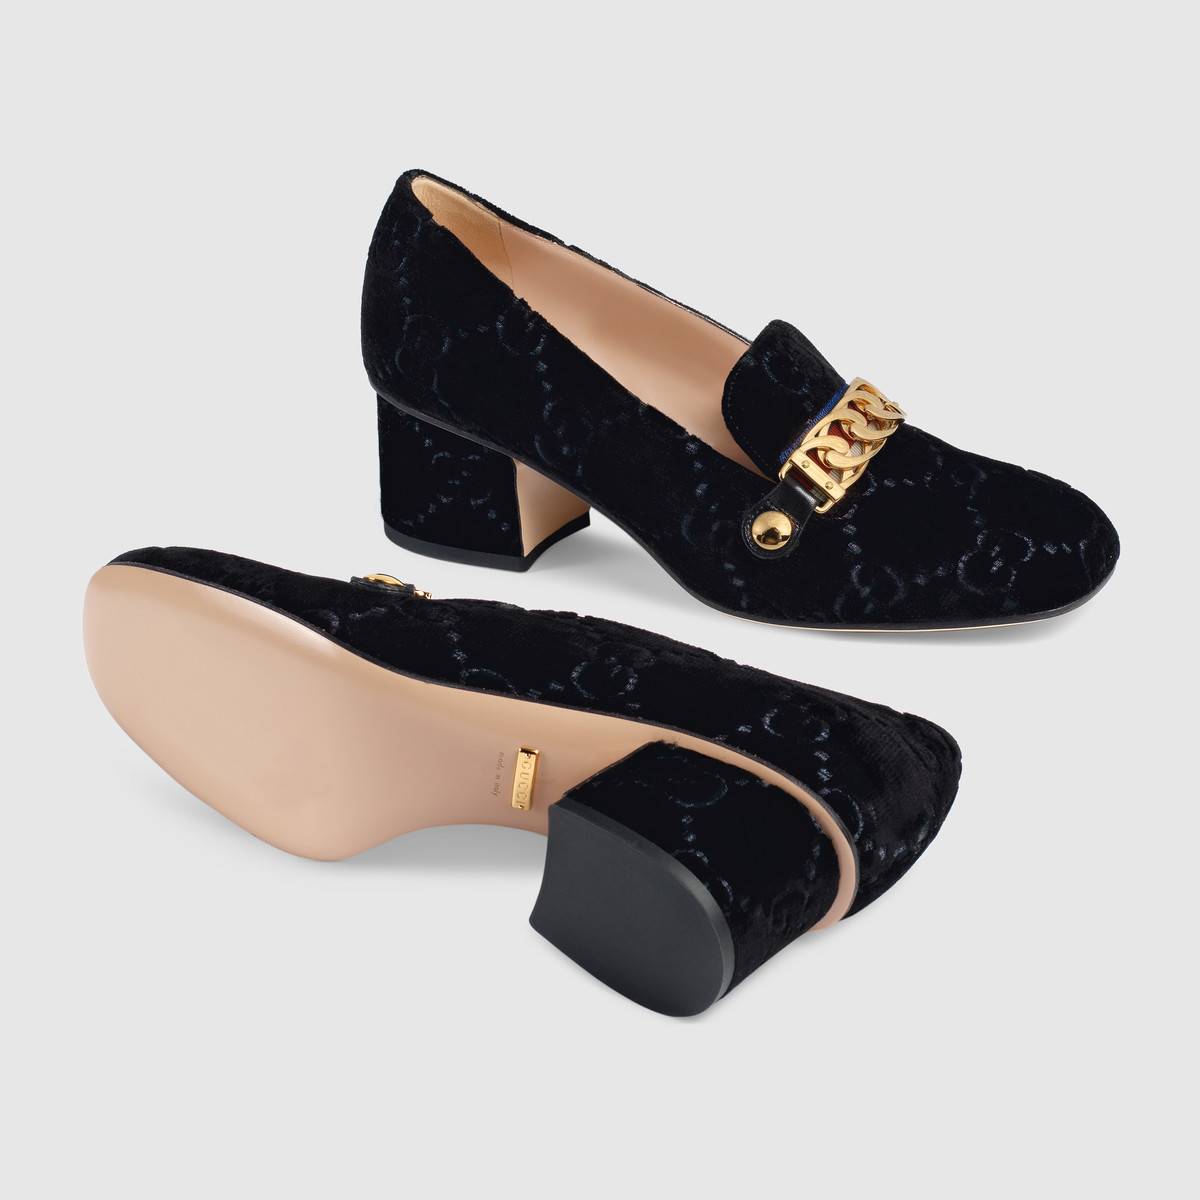 Gucci GG mid-heel pump with Double G GG1469BL-1